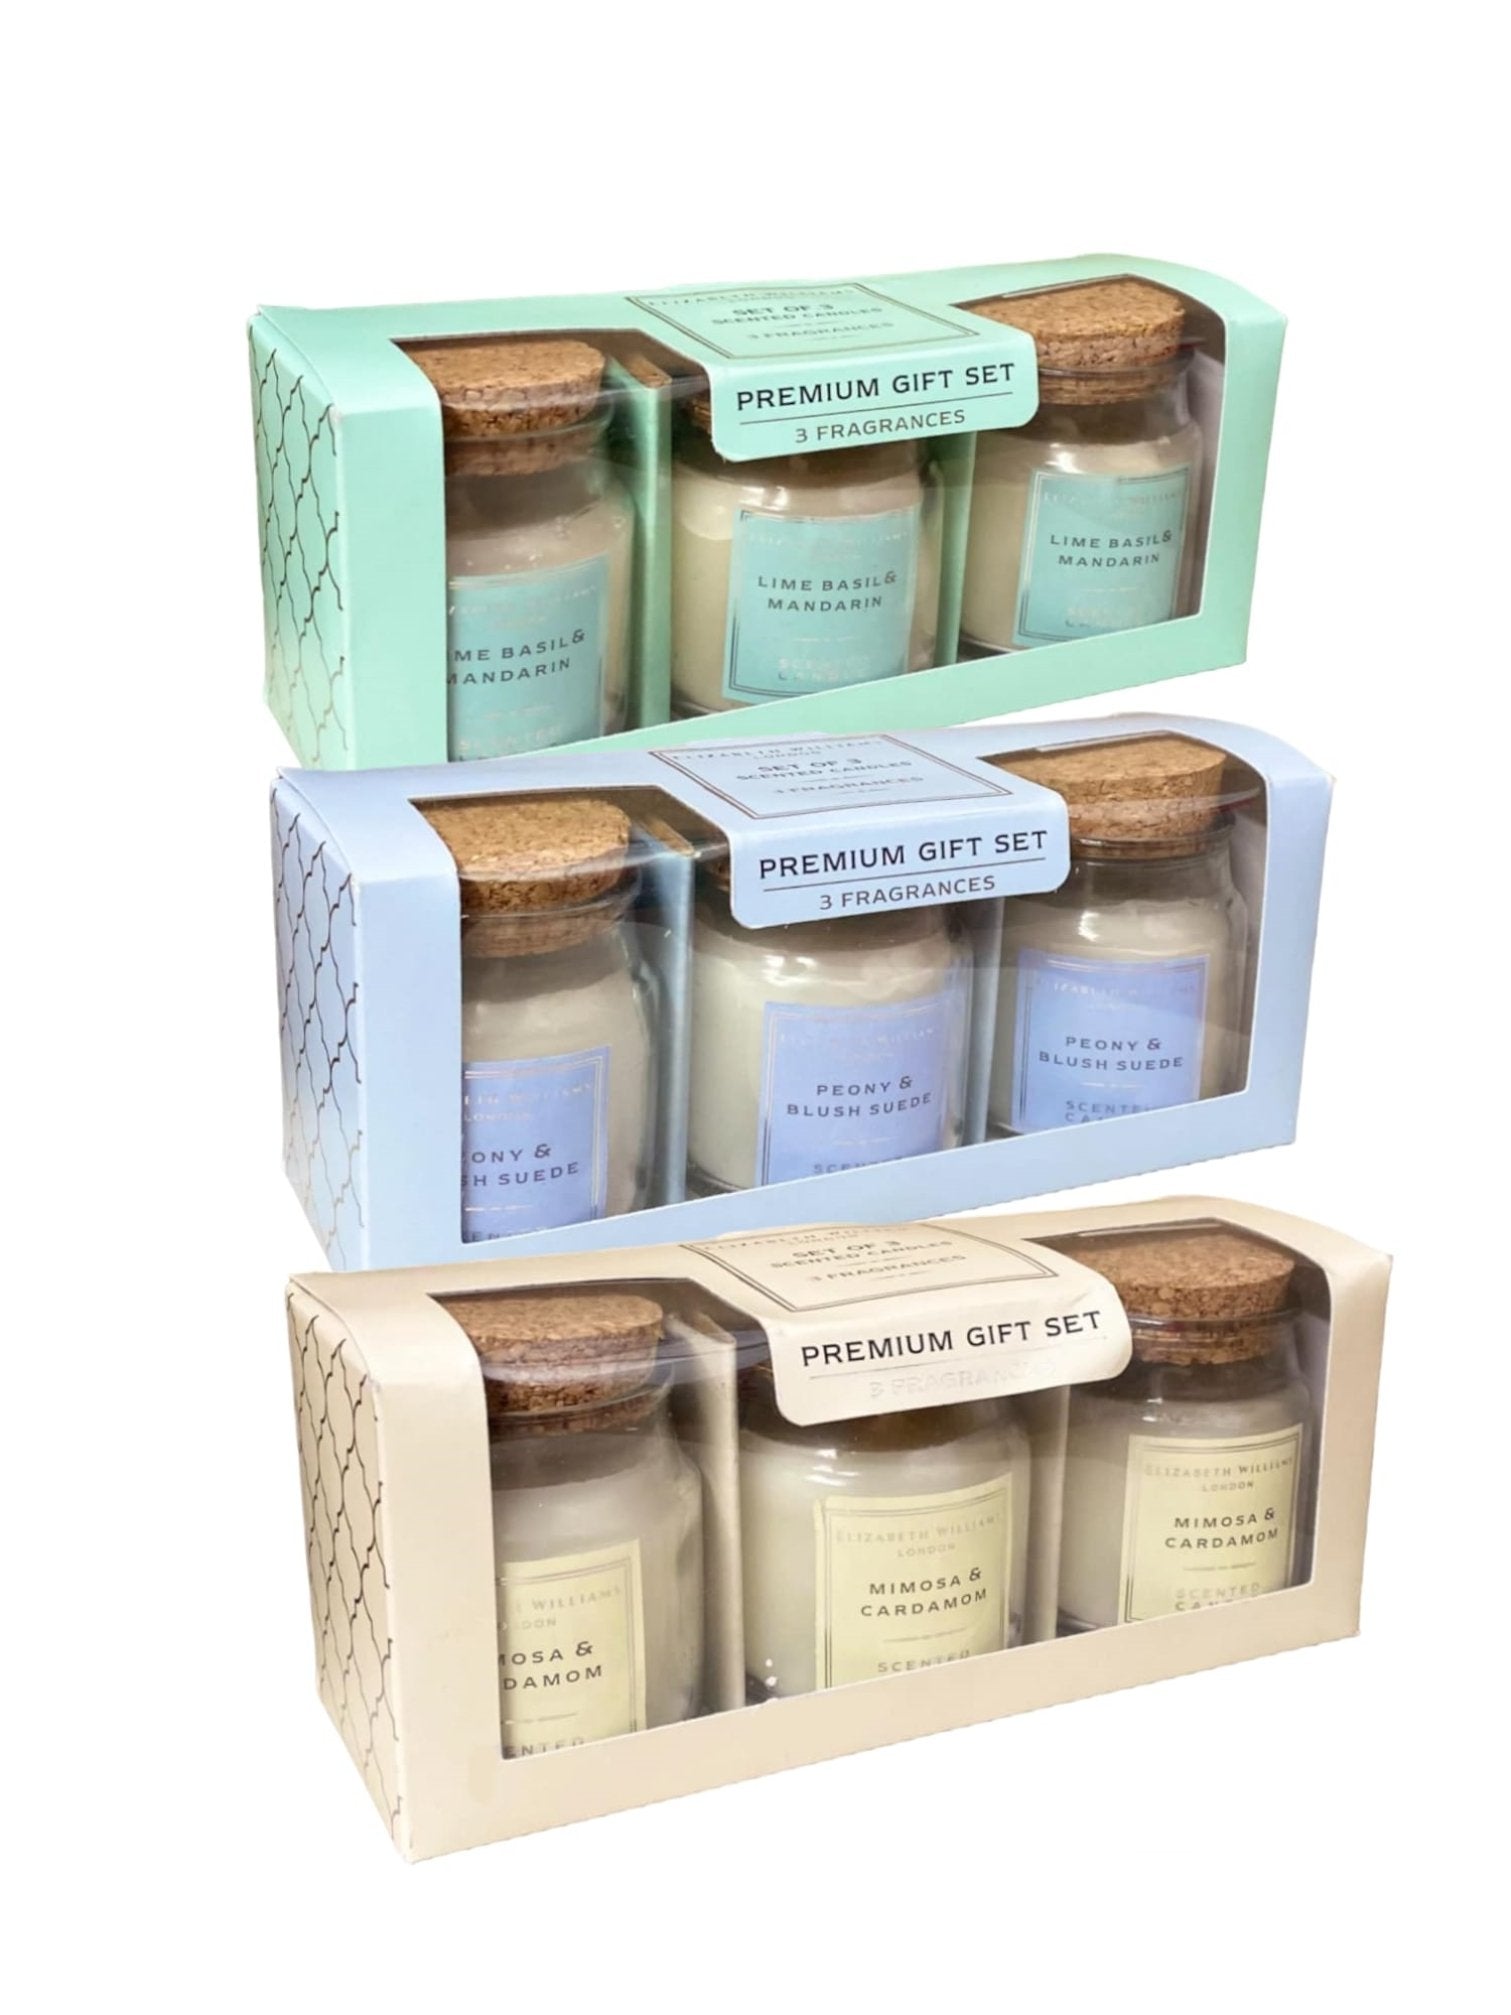 View Six Sets of Trio Candle Gift Box information